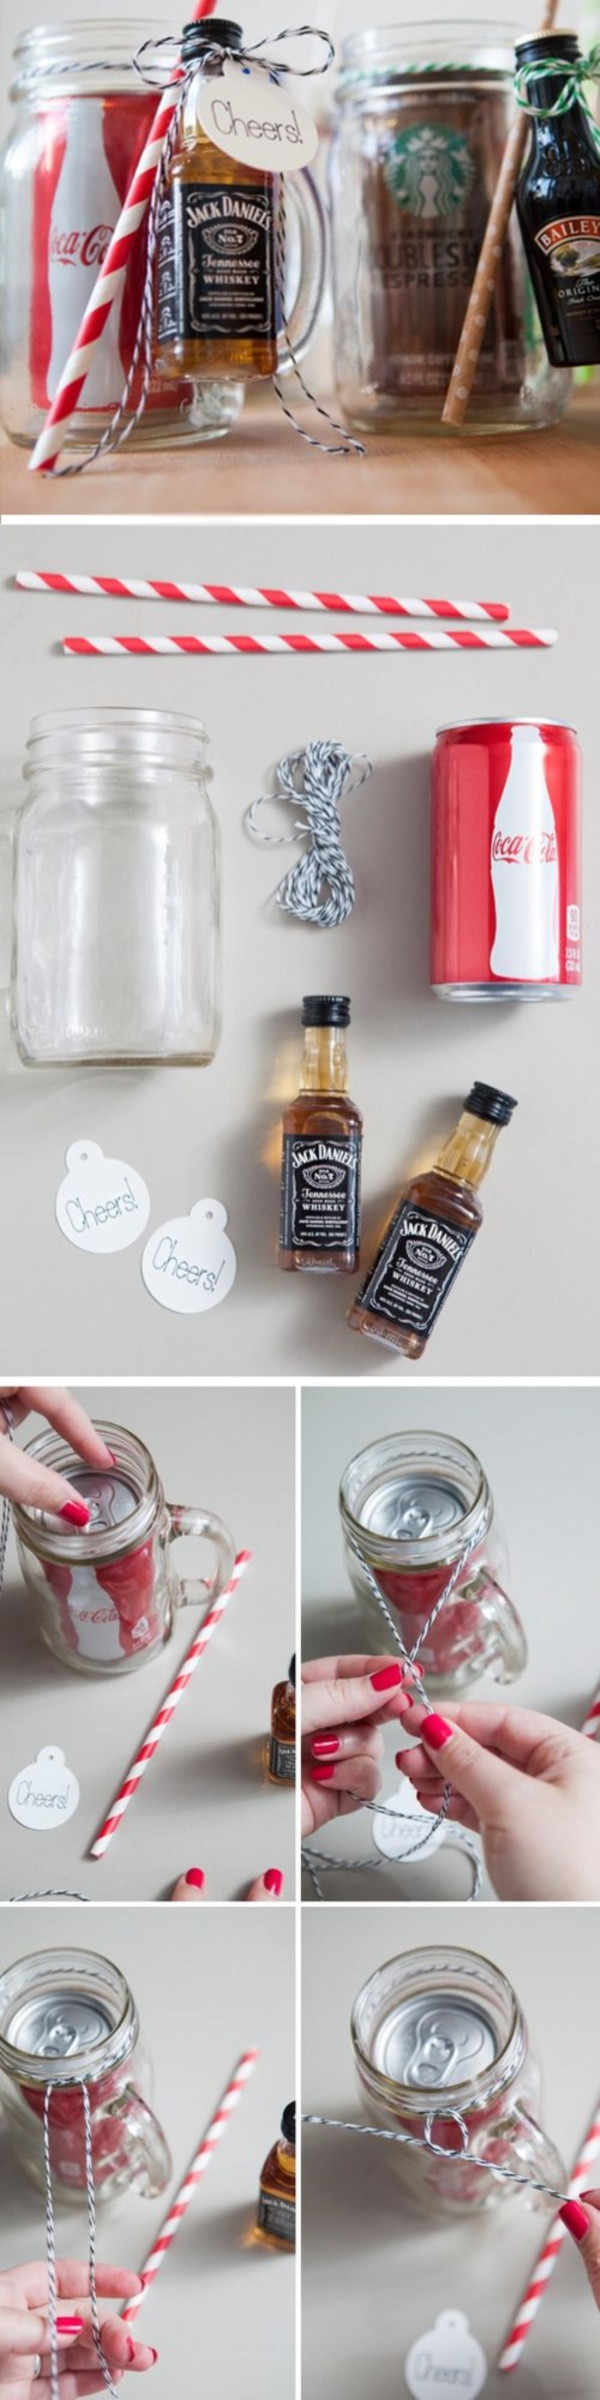 Cute Valentines Day Ideas For Him
 101 Homemade Valentines Day Ideas for Him that re really CUTE